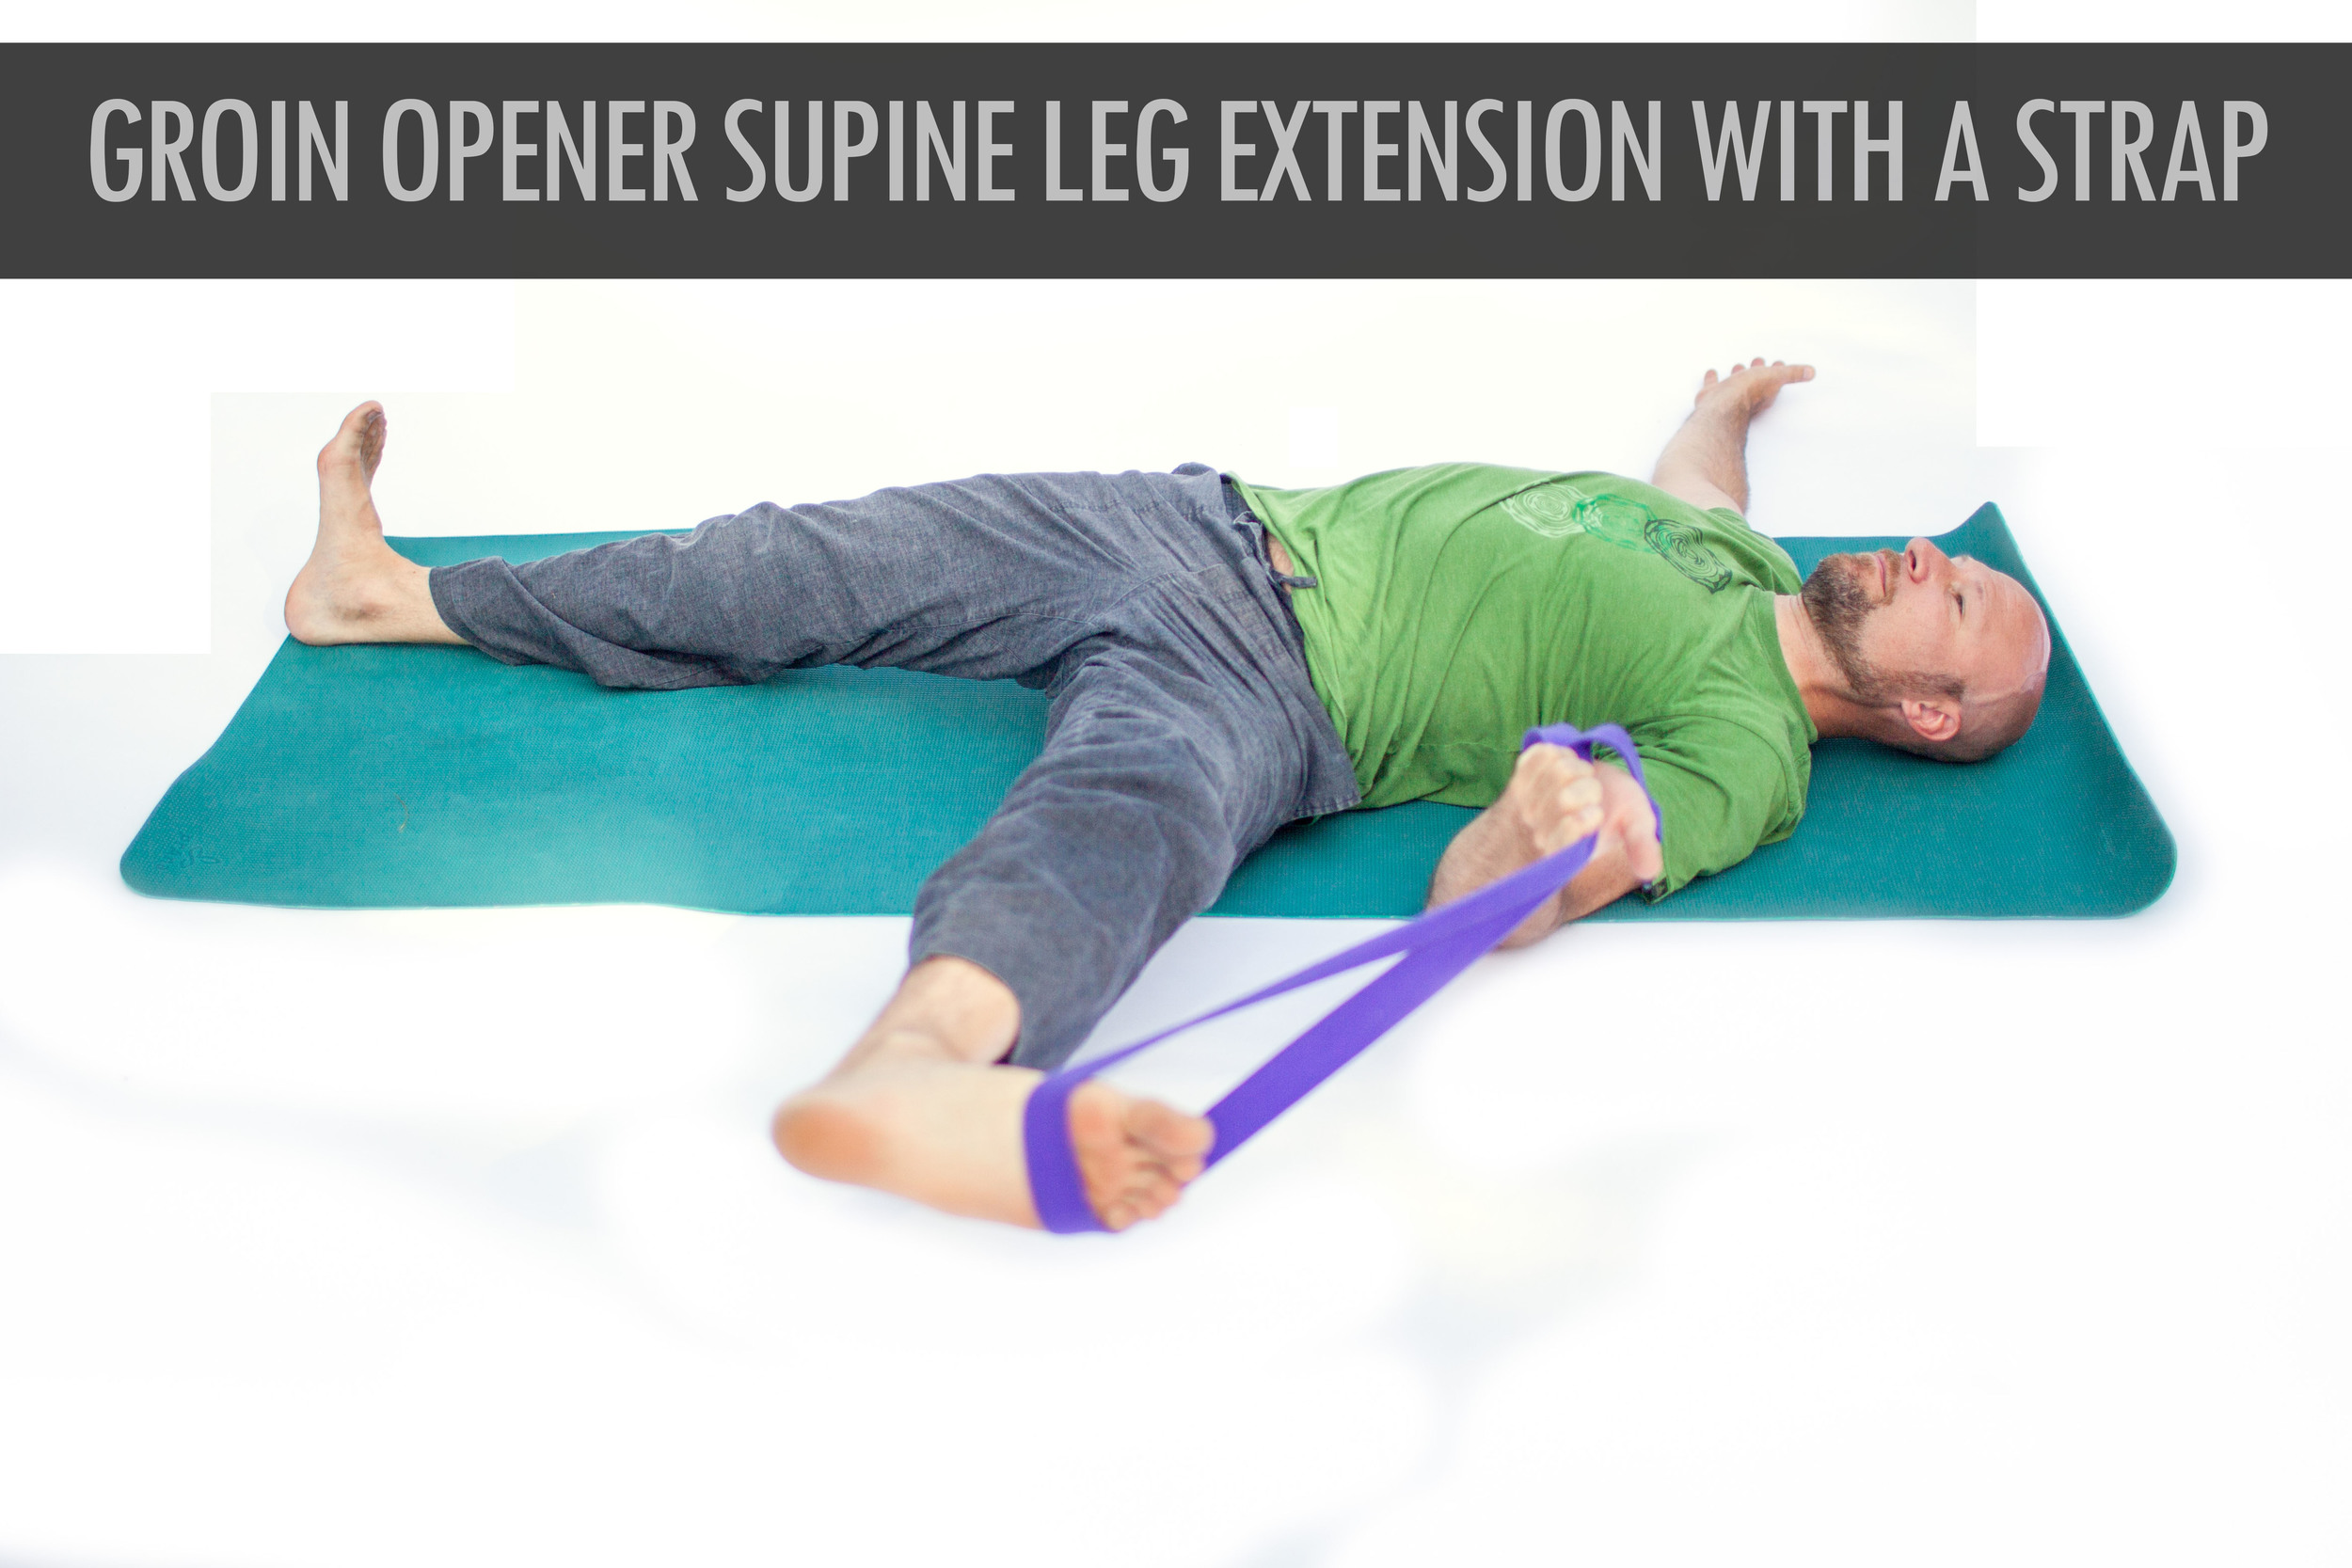 Groin Opener Supine Leg Extension With A Strap.jpg